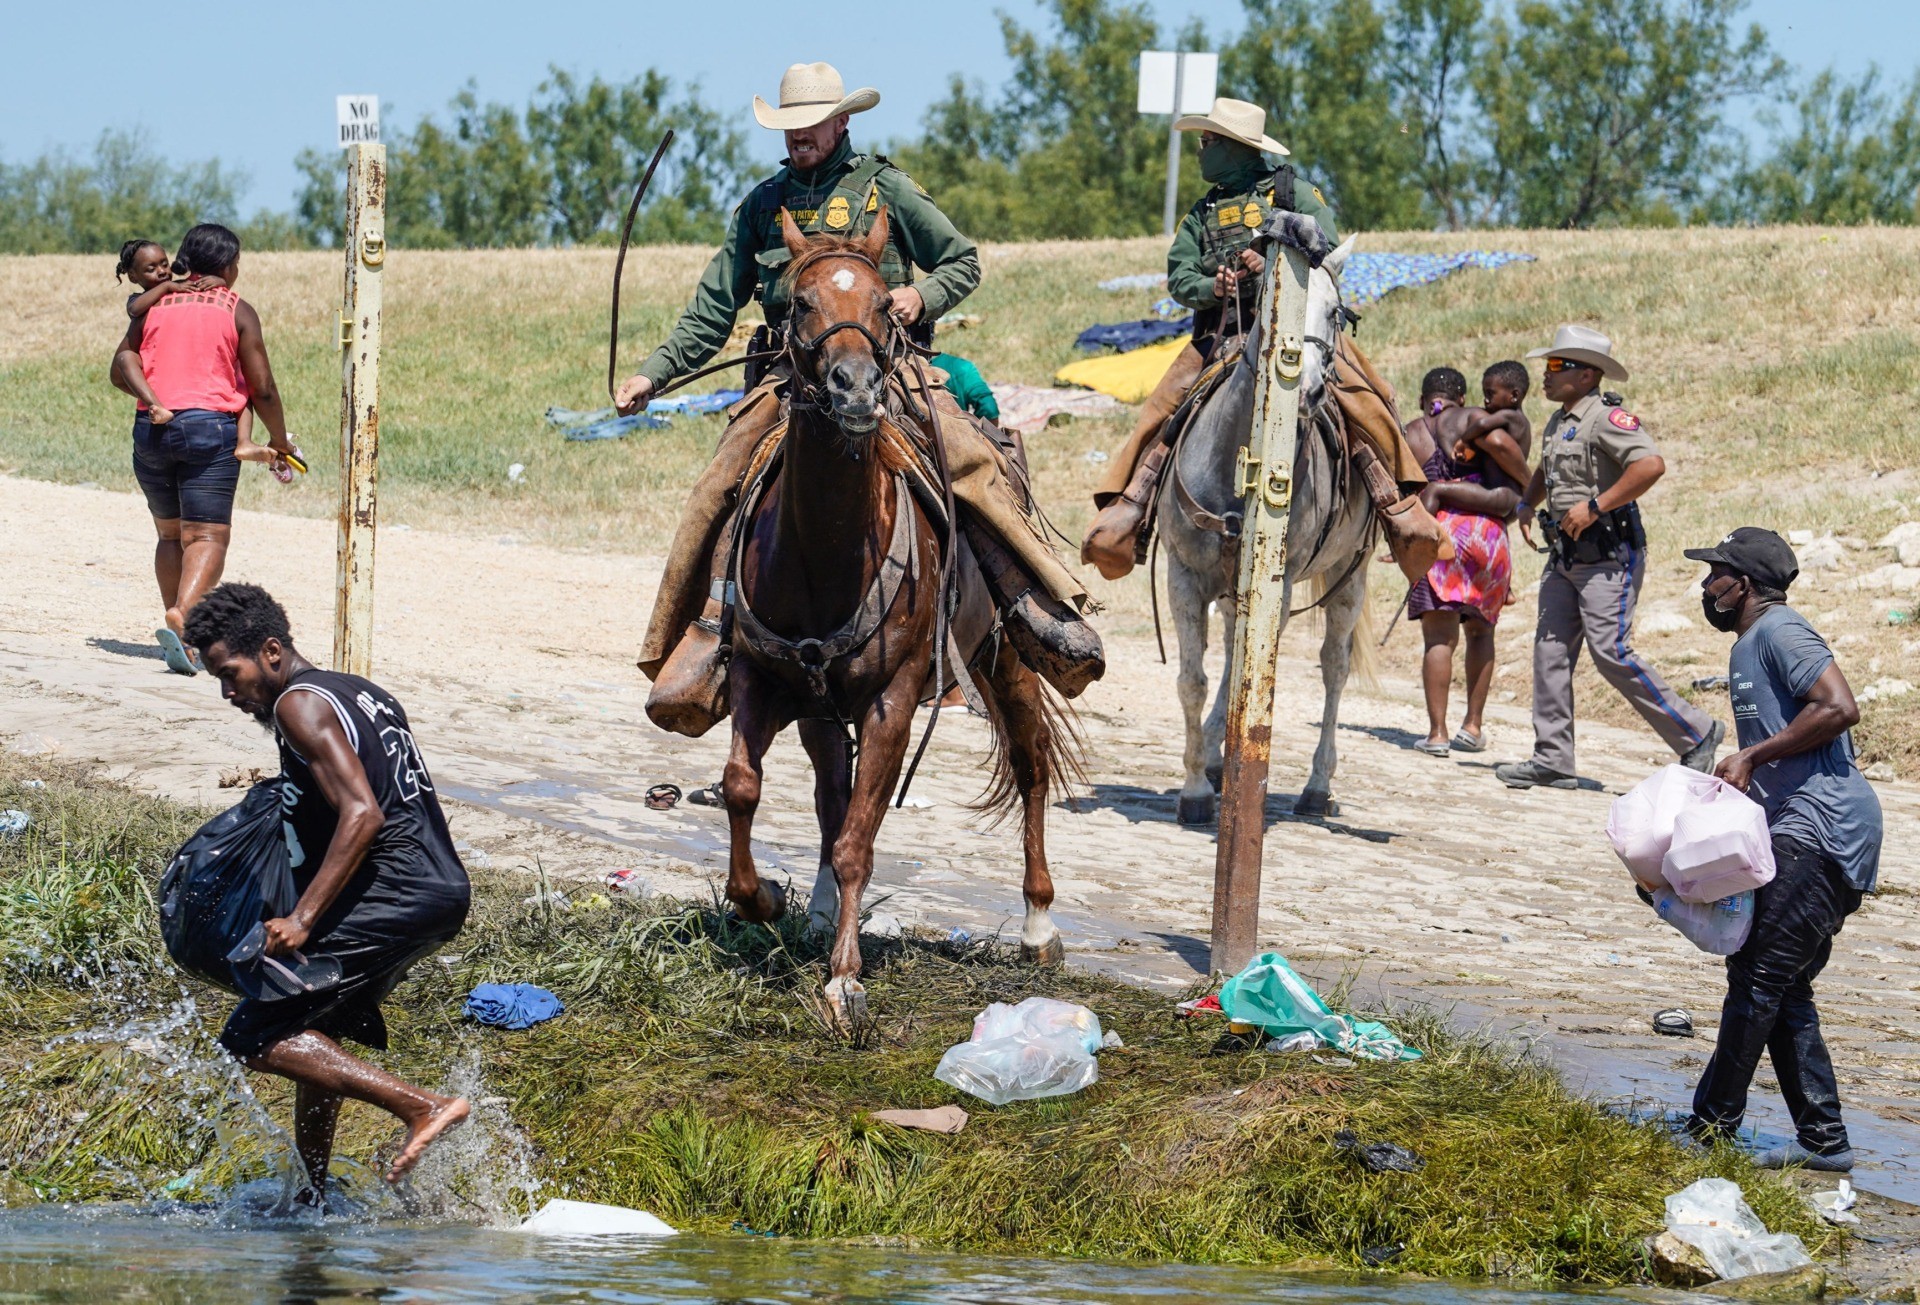 TOPSHOT - United States Border Patrol agents on horseback try to stop Haitian migrants from entering an encampment on the banks of the Rio Grande near the Acuna Del Rio International Bridge in Del Rio, Texas on September 19, 2021. - US law enforcement are attempting to close off crossing points along the Rio Grande river where migrants cross to get food and water, which is scarce in the encampment. The United States said Saturday it would ramp up deportation flights for thousands of migrants who flooded into the Texas border city of Del Rio, as authorities scramble to alleviate a burgeoning crisis for President Joe Biden's administration. (Photo by PAUL RATJE / AFP) (Photo by PAUL RATJE/AFP via Getty Images)